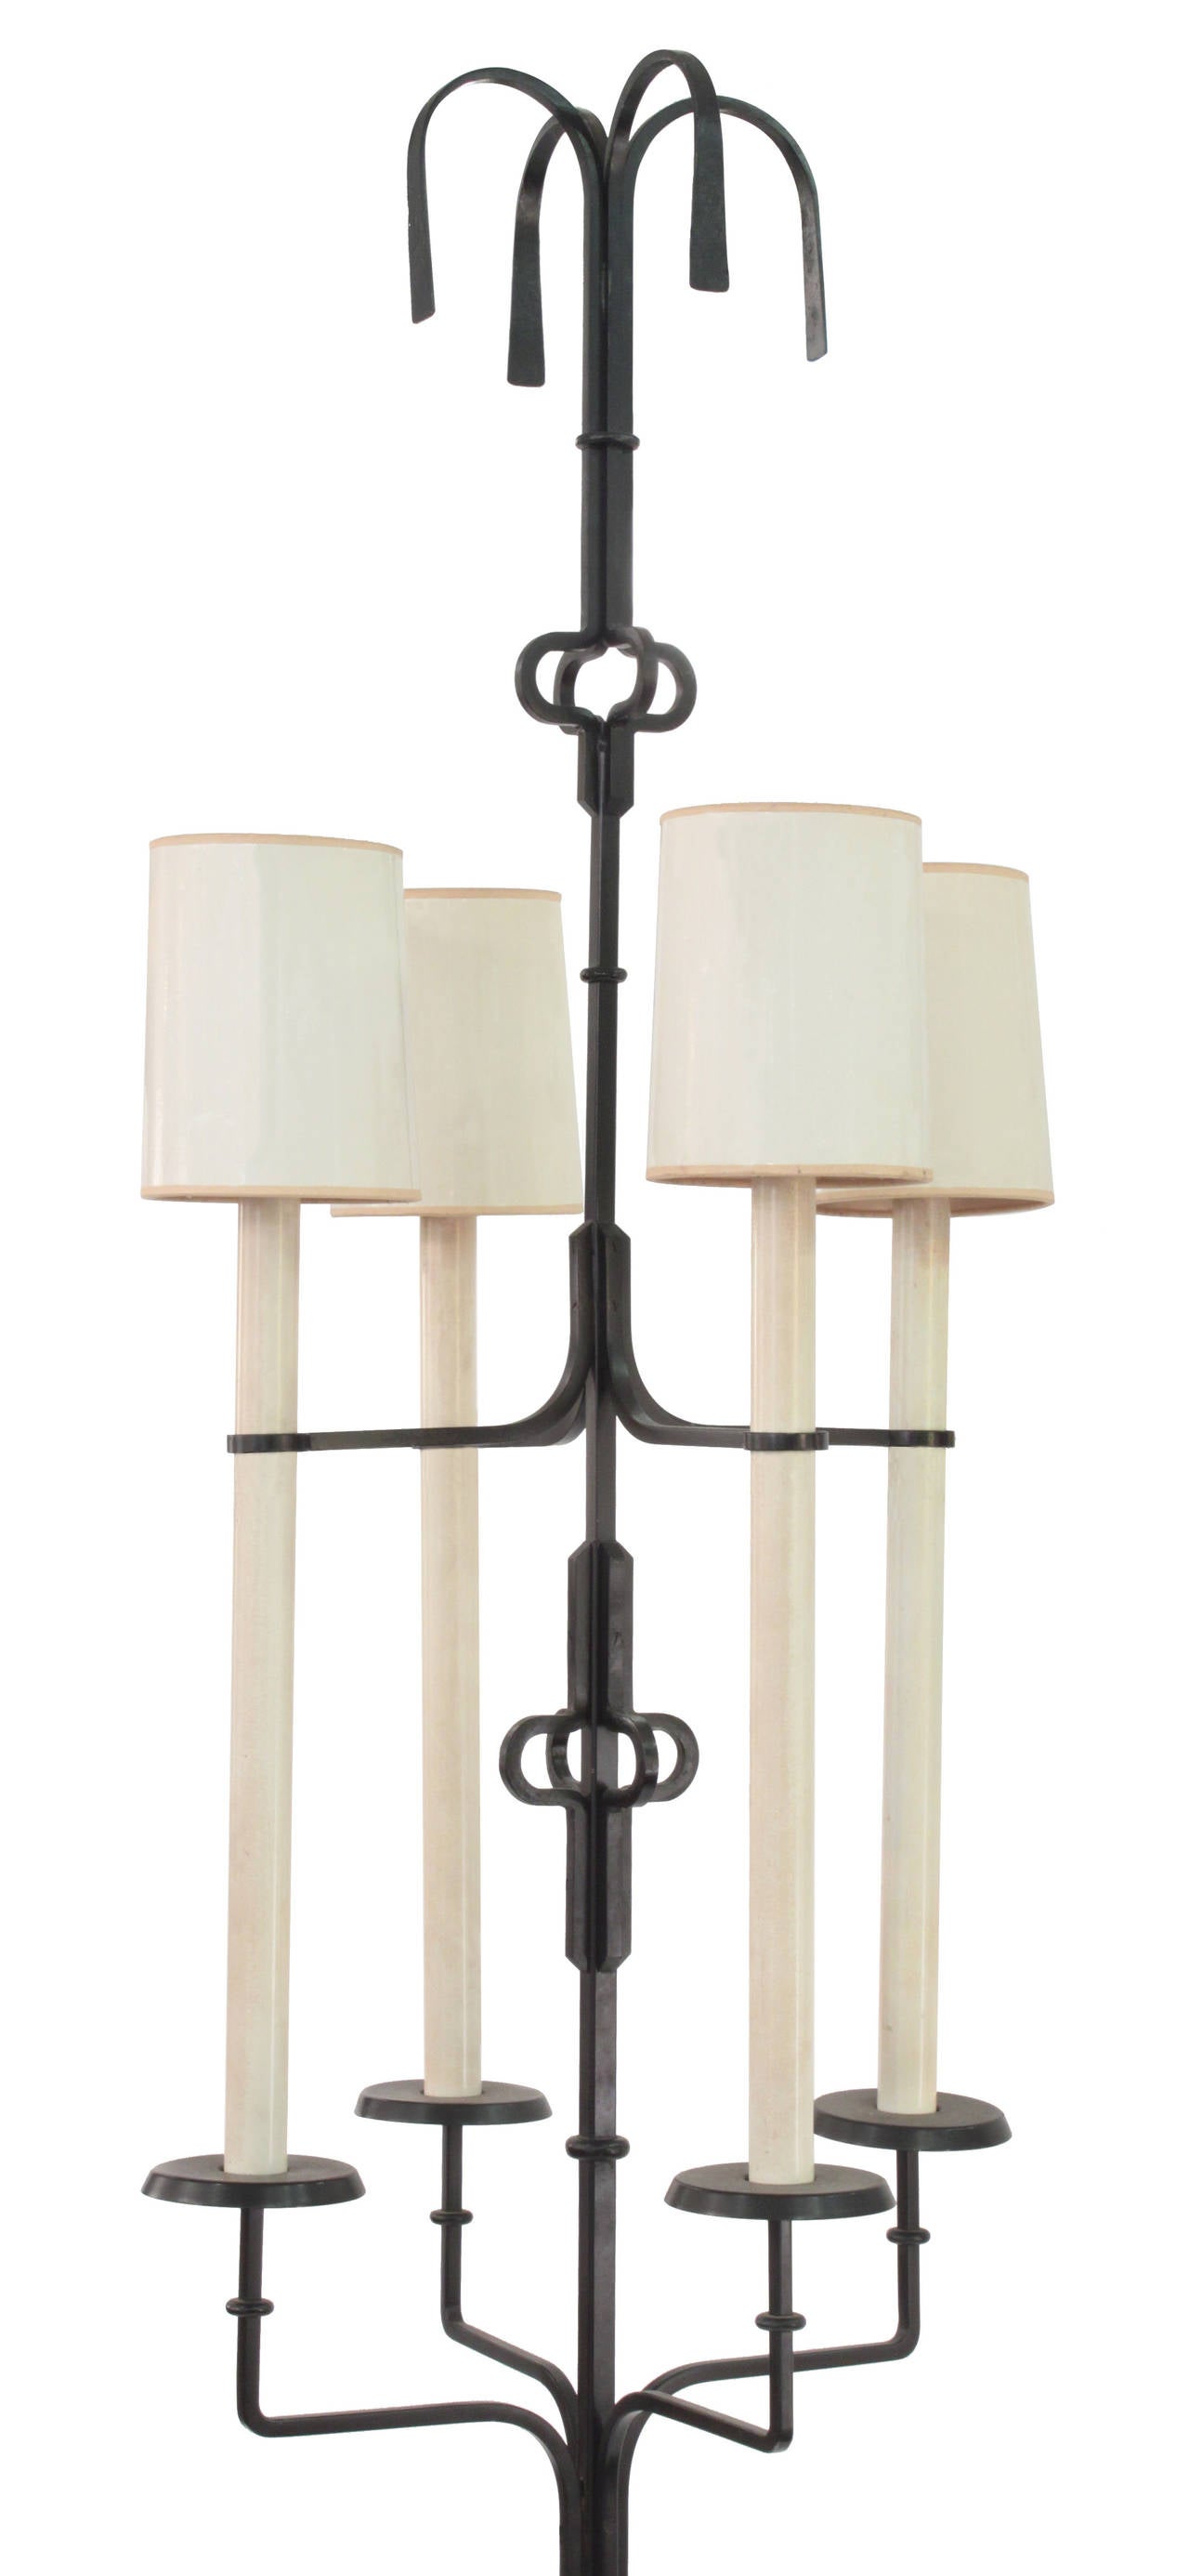 Exceptional and large floor lamp #27 in wrought iron with four lights by Tommi Parzinger for Parzinger Originals, American, 1950s.